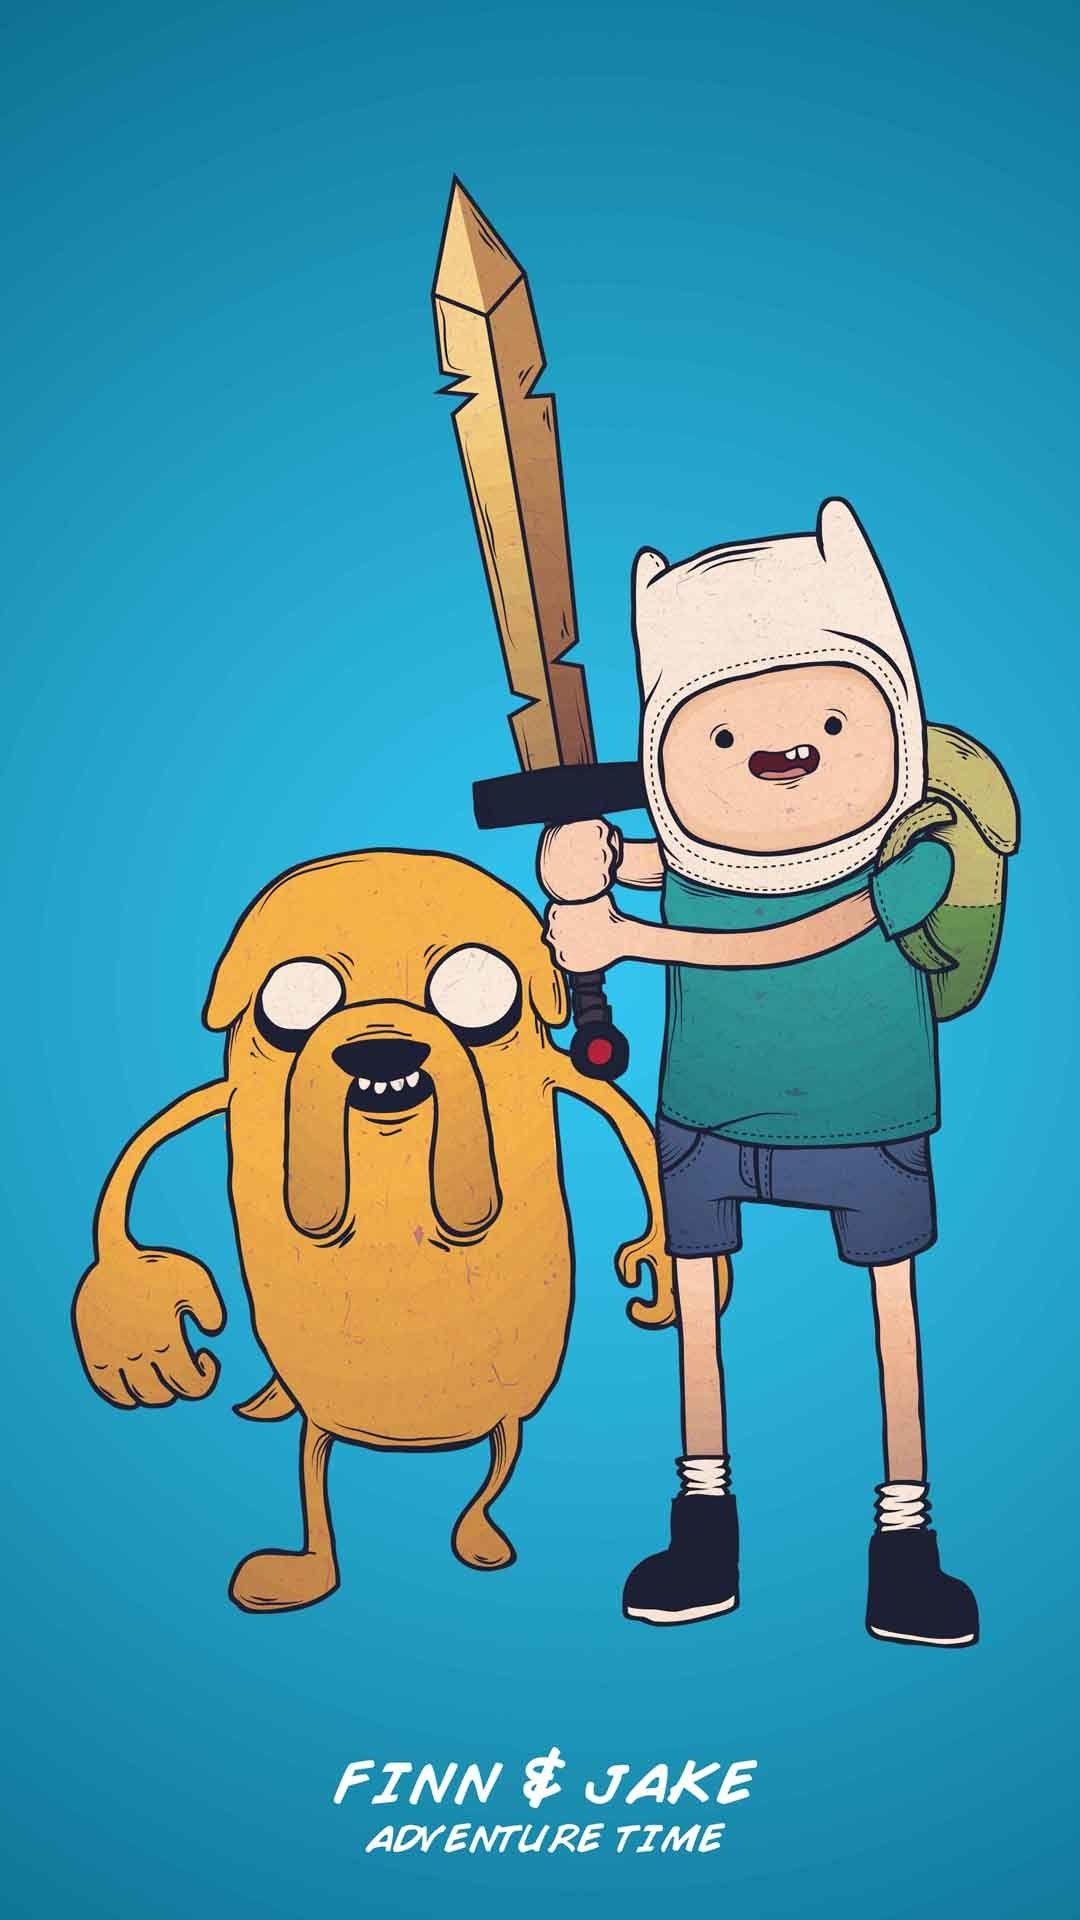 Aesthetic Adventure Time Wallpaper Android. Adventure time wallpaper, Jake adventure time, Adventure time iphone wallpaper